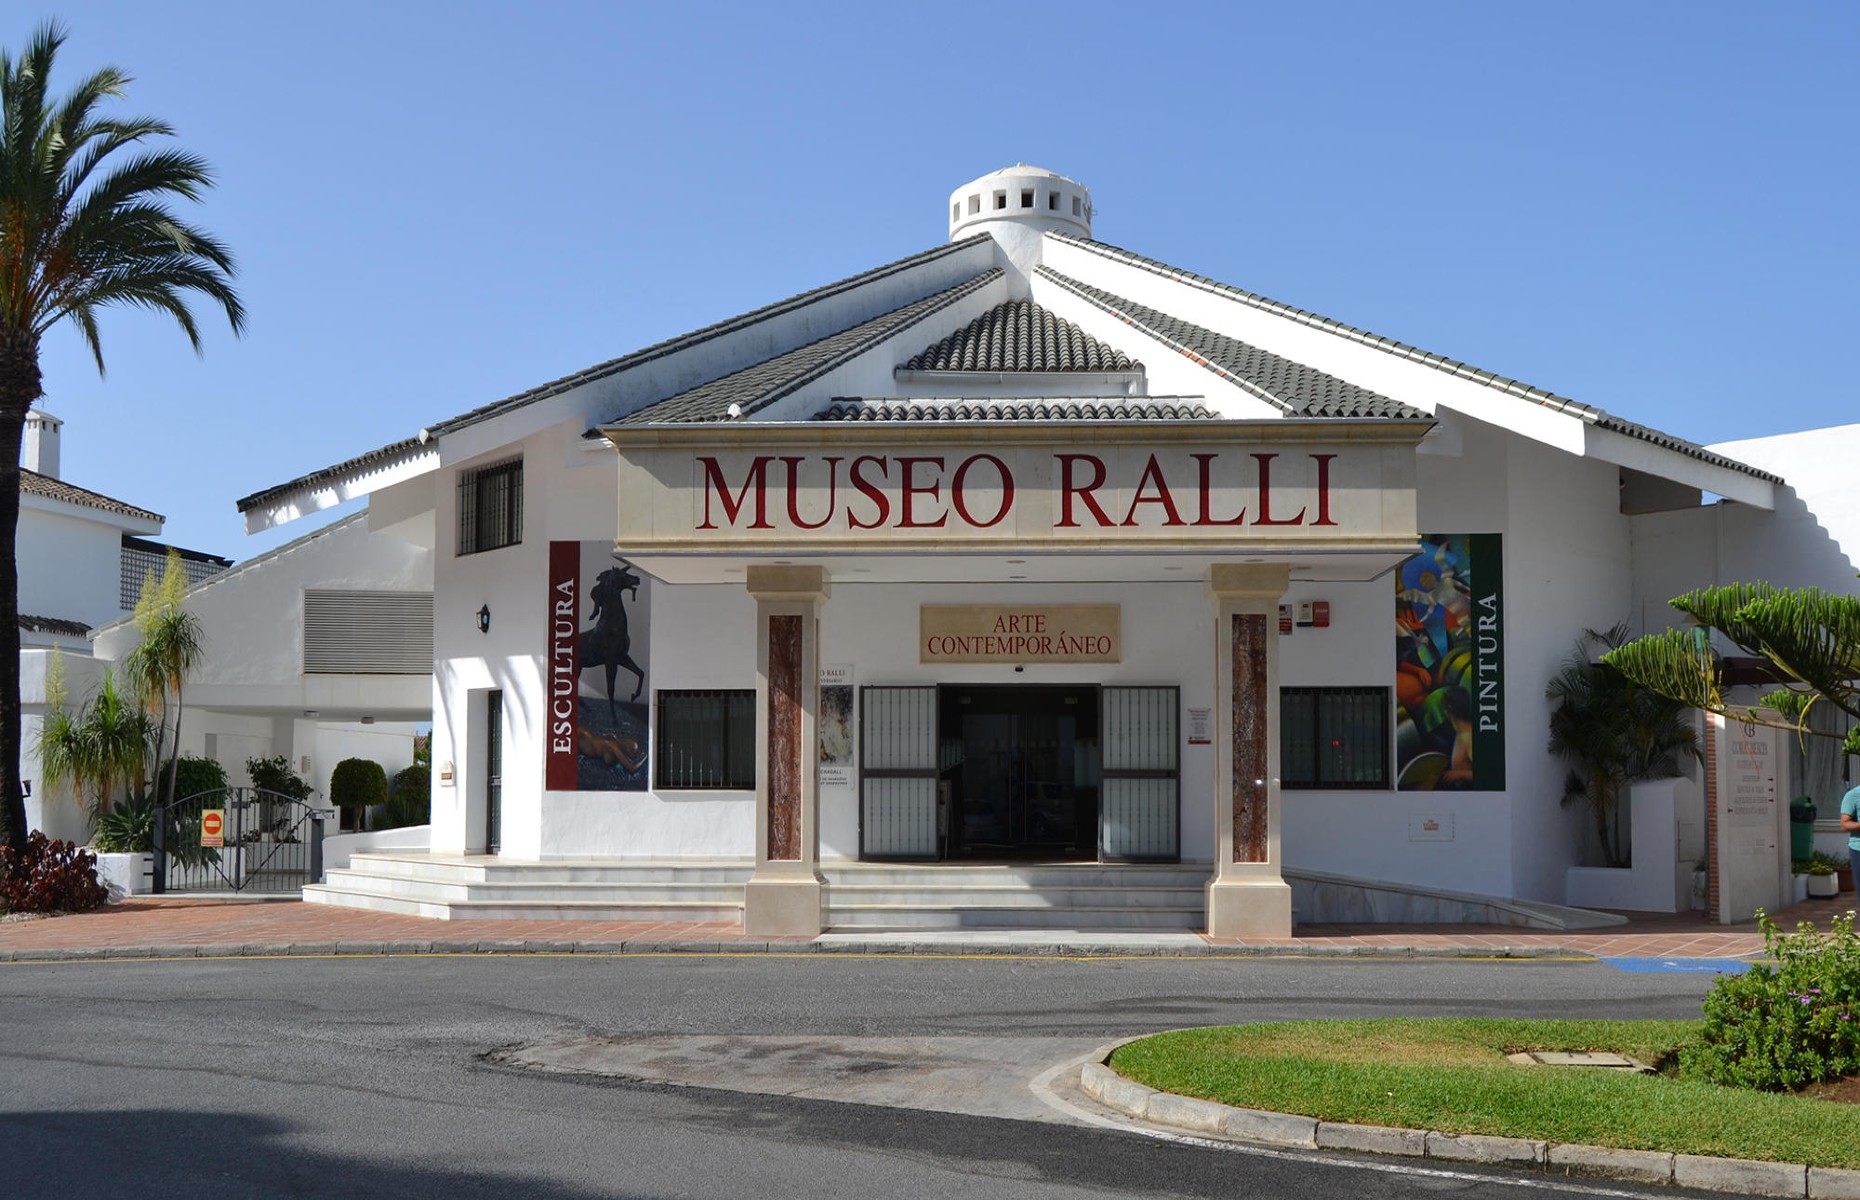 Exterior of Museo Ralli (Image: rallimuseums.com)